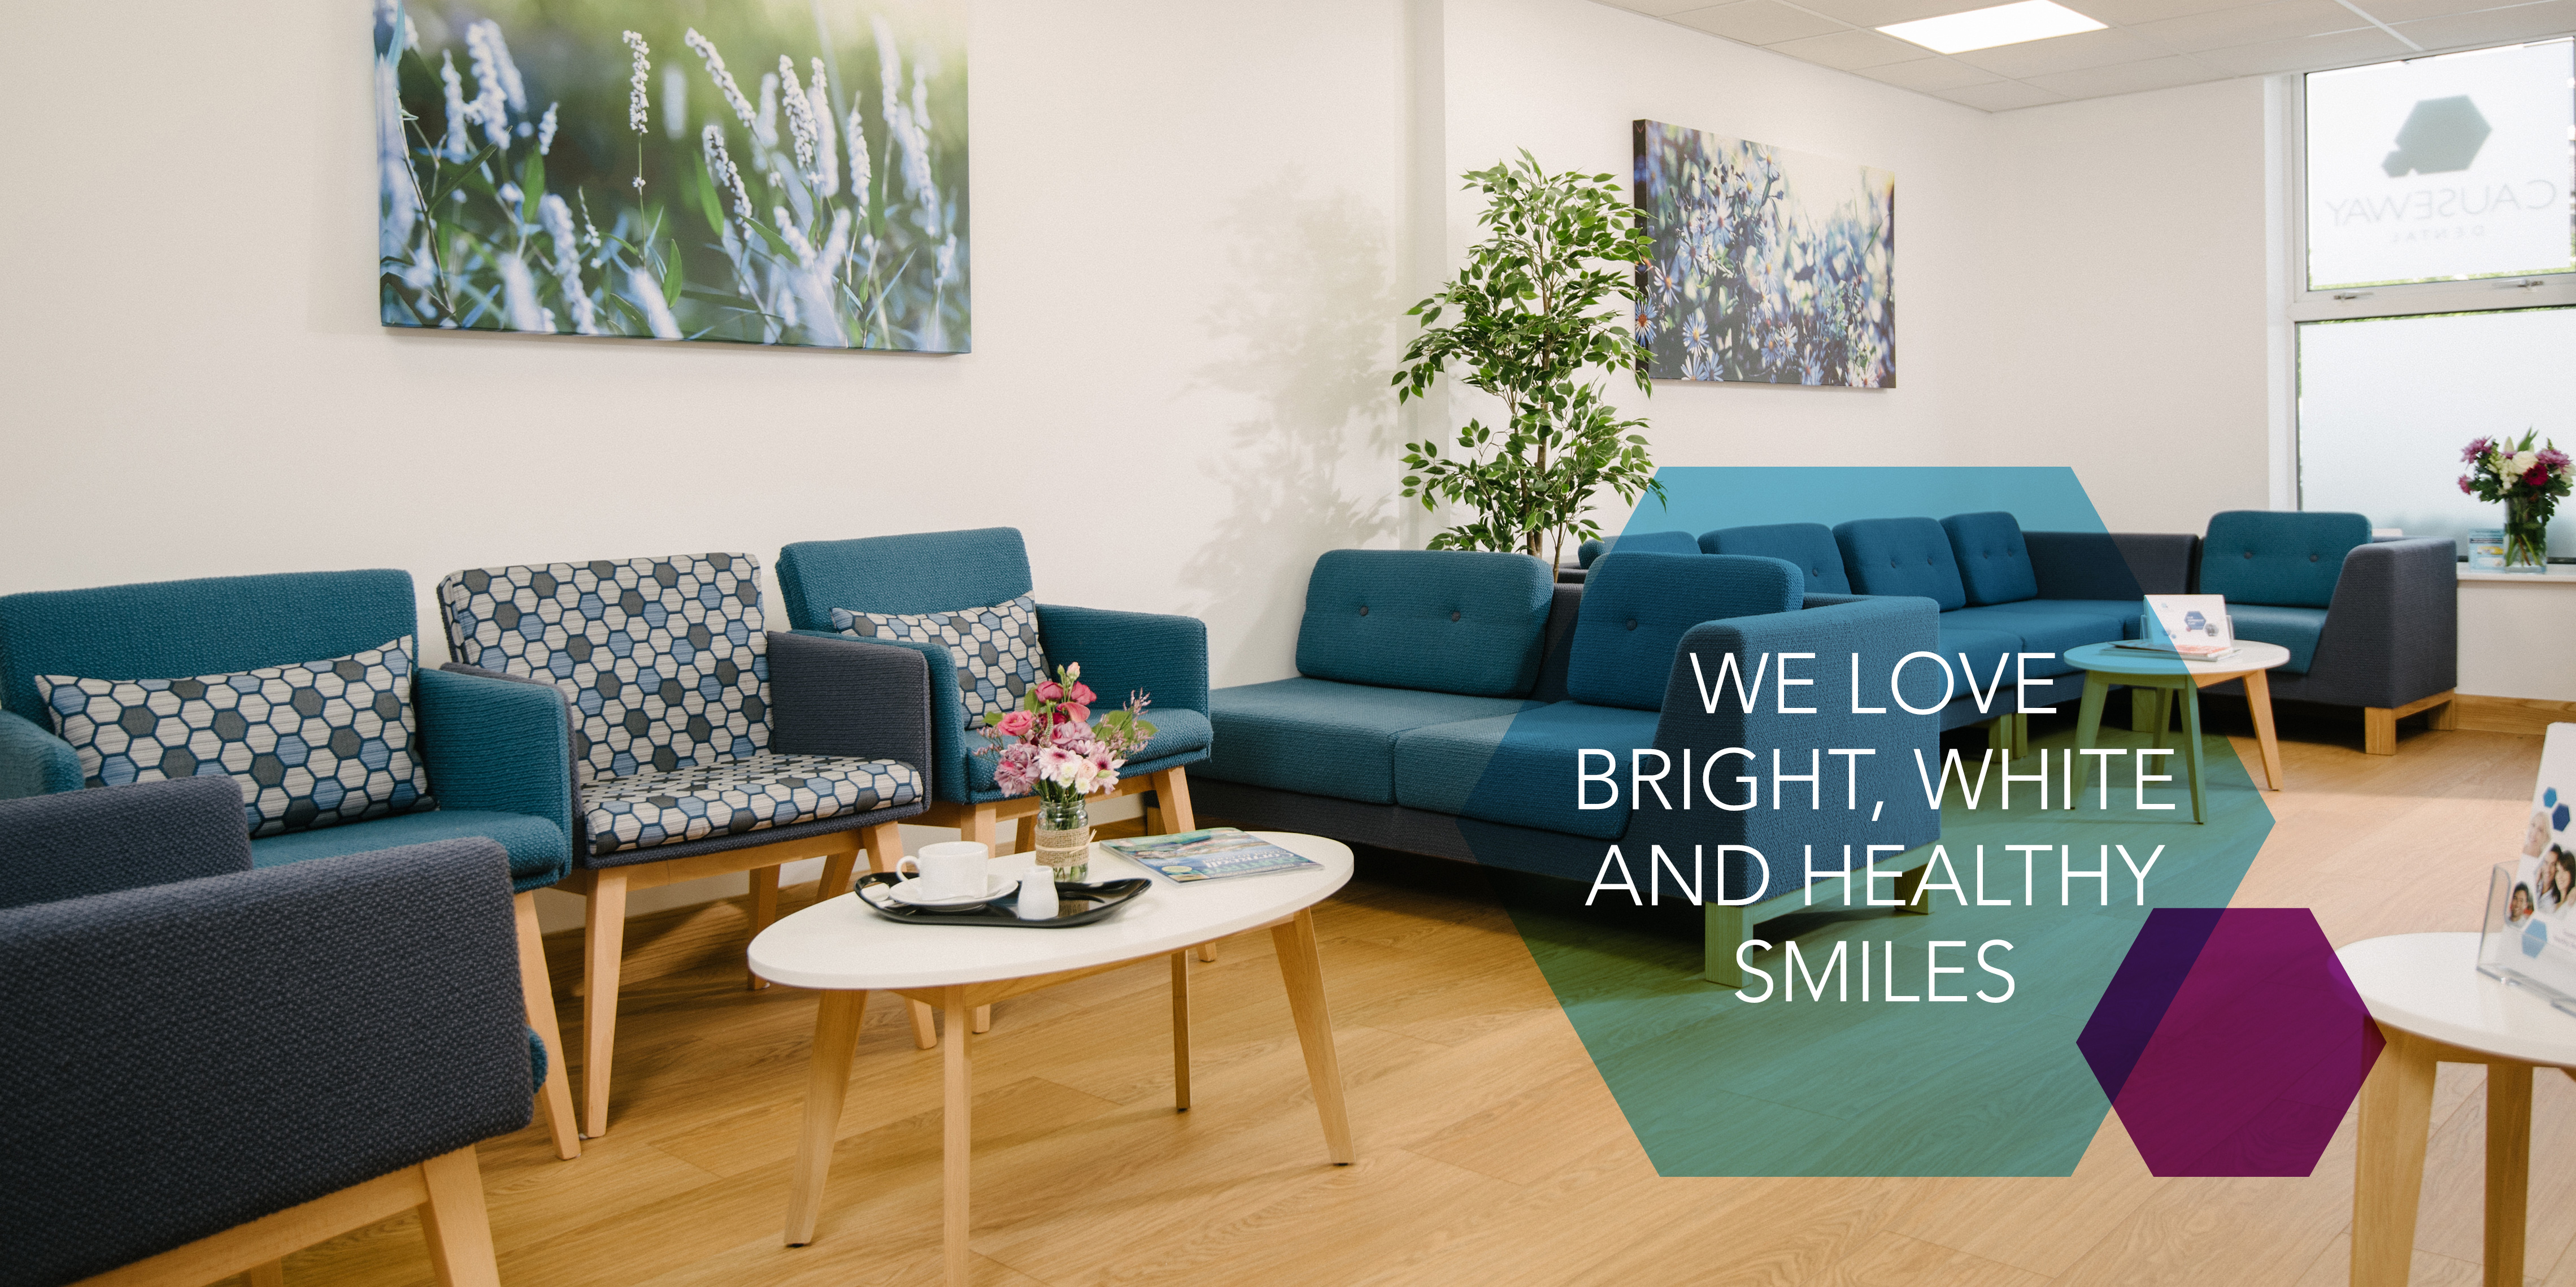 Welcome to Causeway Dental